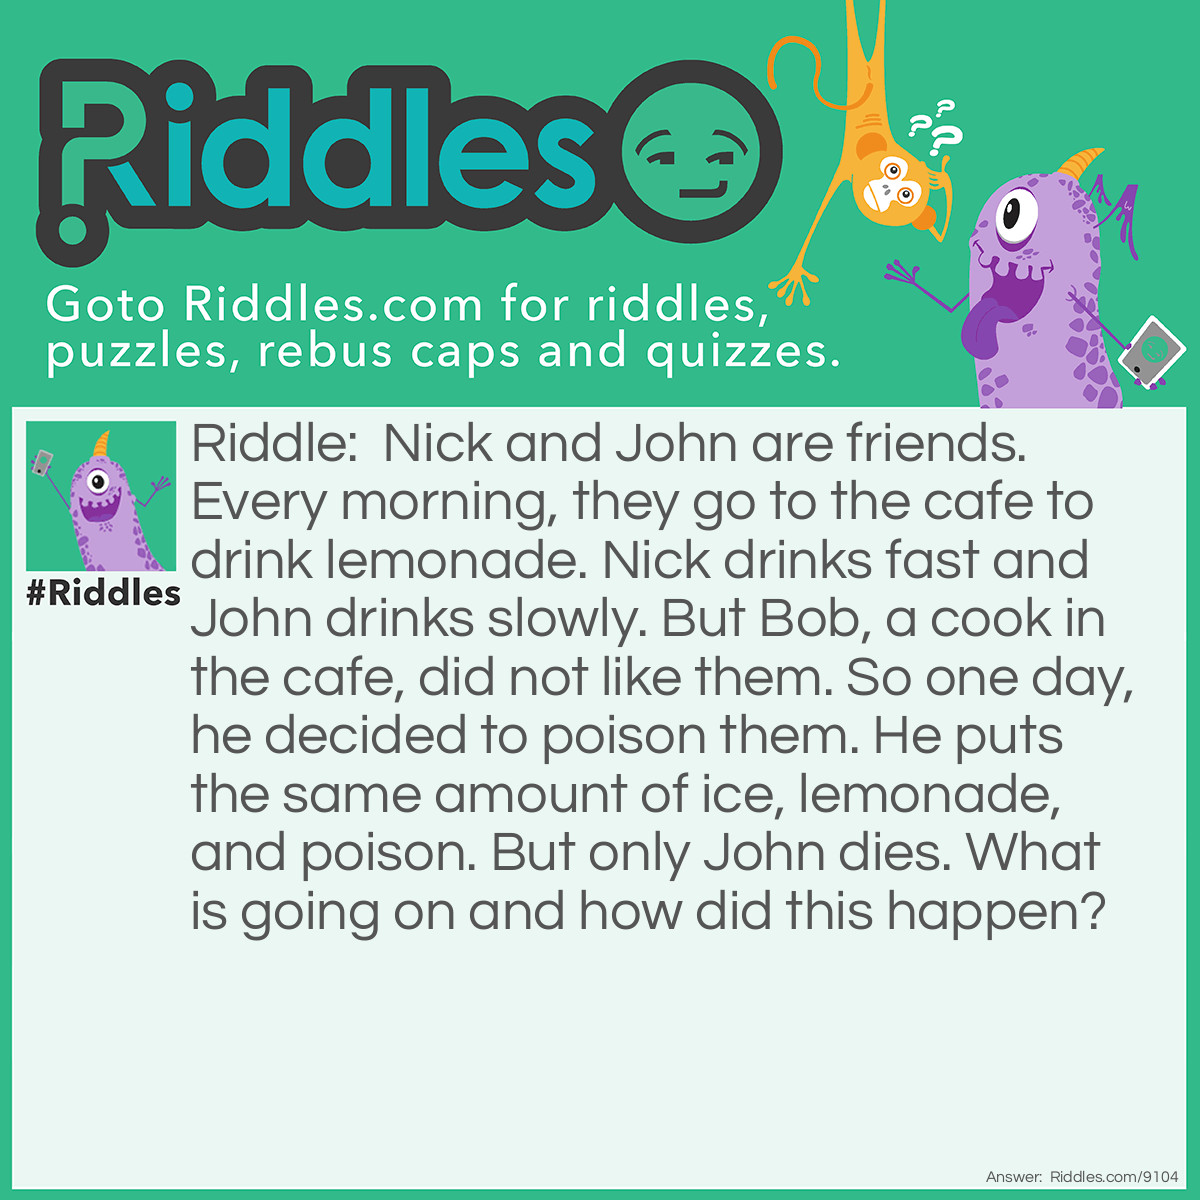 Riddle: Nick and John are friends. Every morning, they go to the cafe to drink lemonade. Nick drinks fast and John drinks slowly. But Bob, a cook in the cafe, did not like them. So one day, he decided to poison them. He puts the same amount of ice, lemonade, and poison. But only John dies. What is going on and how did this happen? Answer: It was because Bob put the poison on the ice. Since Nick drinks fast, the ice never melted in to Nick's lemonade. But John drinks slowly so the ice melted in his lemonade. So since the ice had poison on it and it melted in John's lemonade, John died.